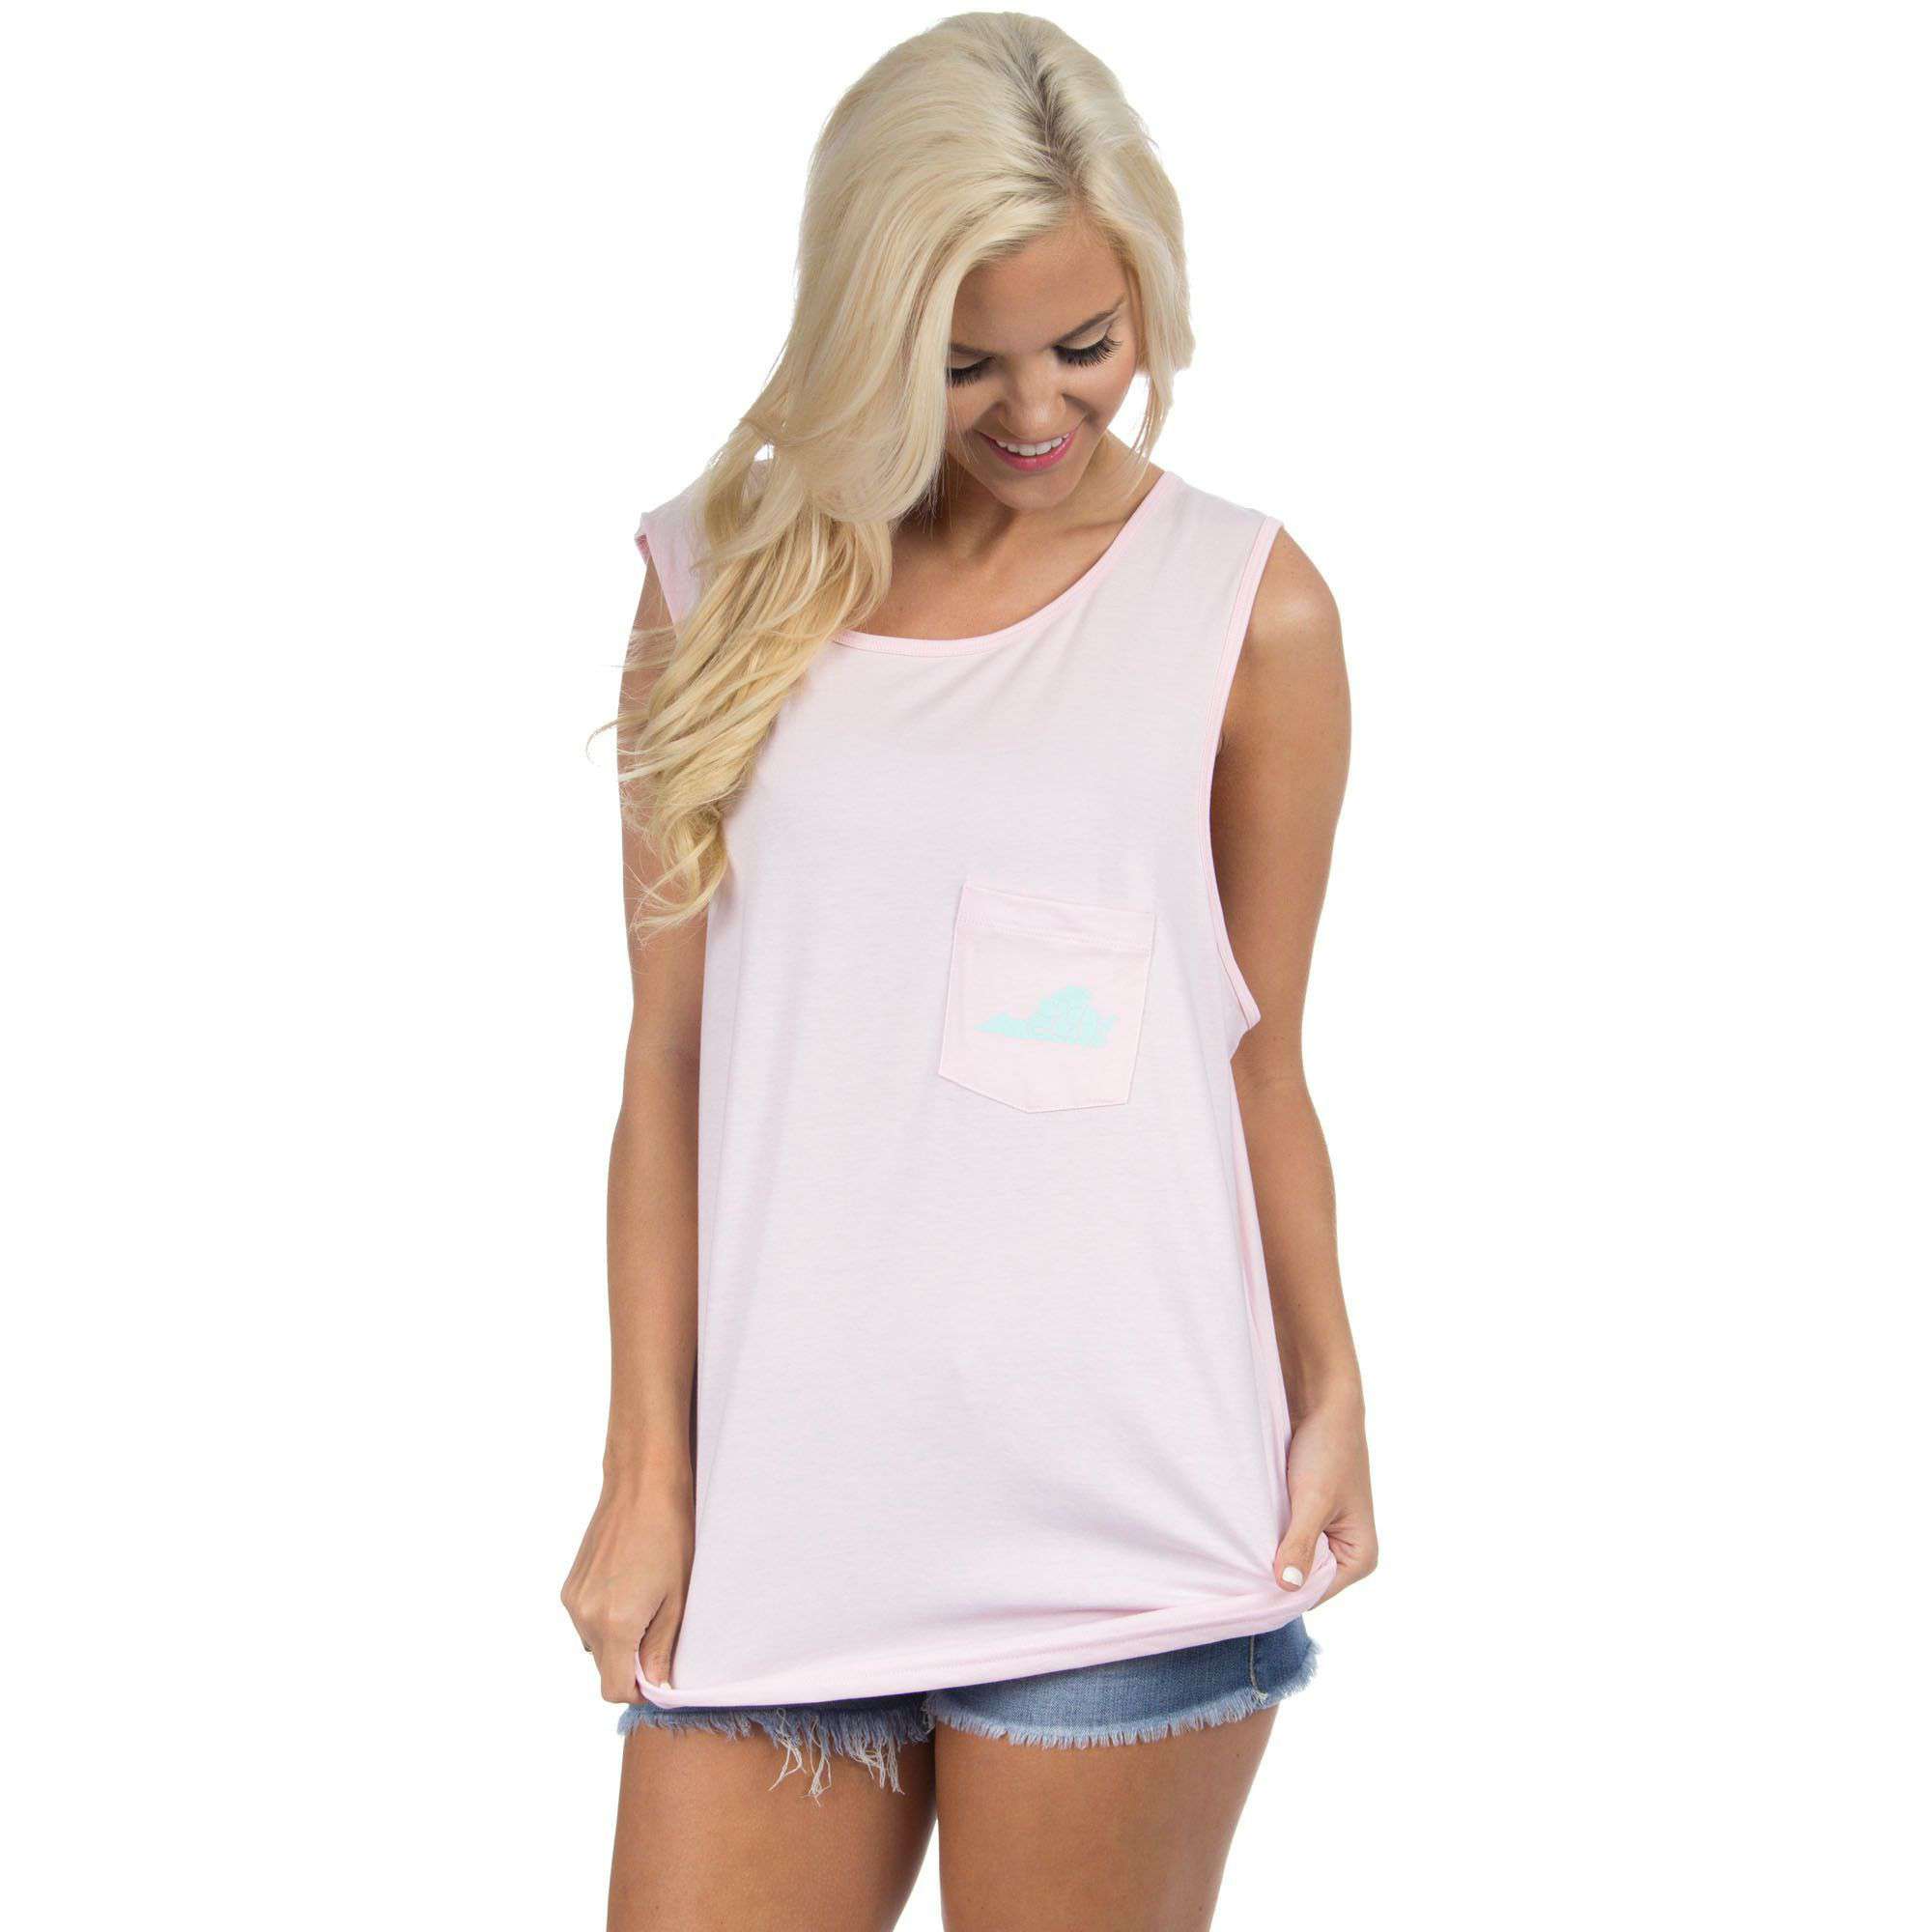 Virginia Lovely State Pocket Tank Top in Pink by Lauren James - Country Club Prep